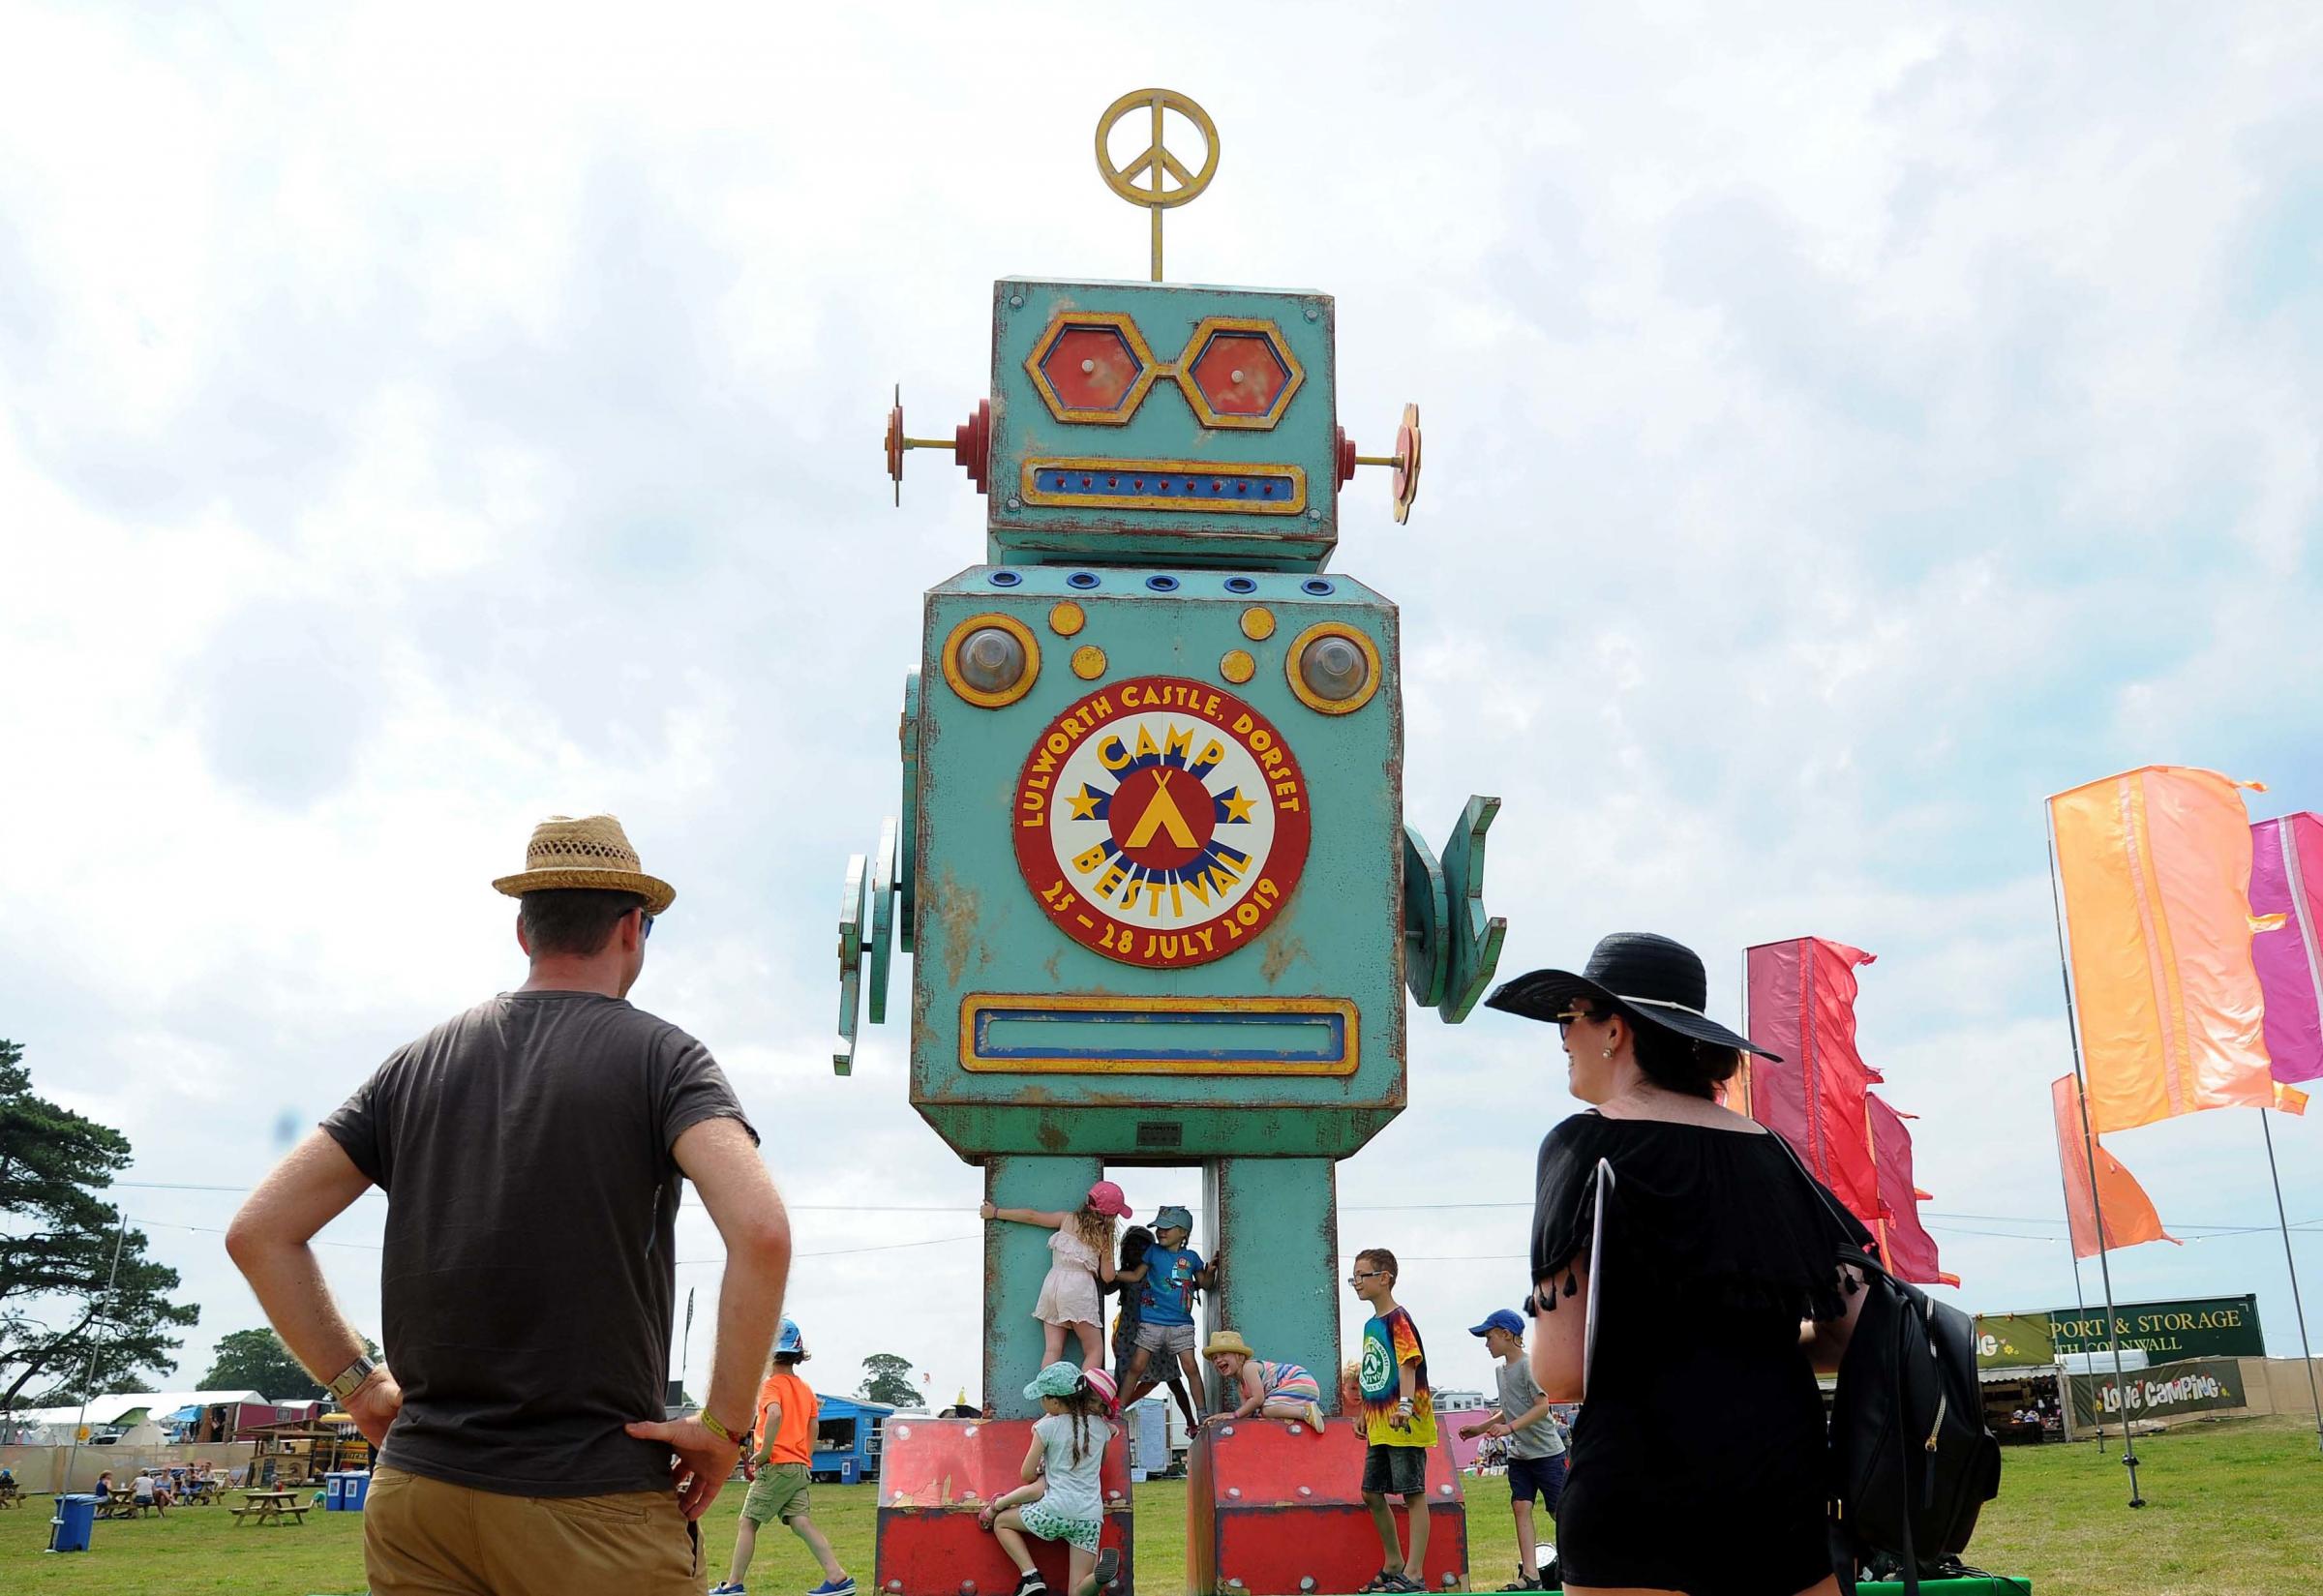 People arrive at Camp Bestival, Love Robot, 25/07/19, Picture: FINNBARR WEBSTER/F30371.